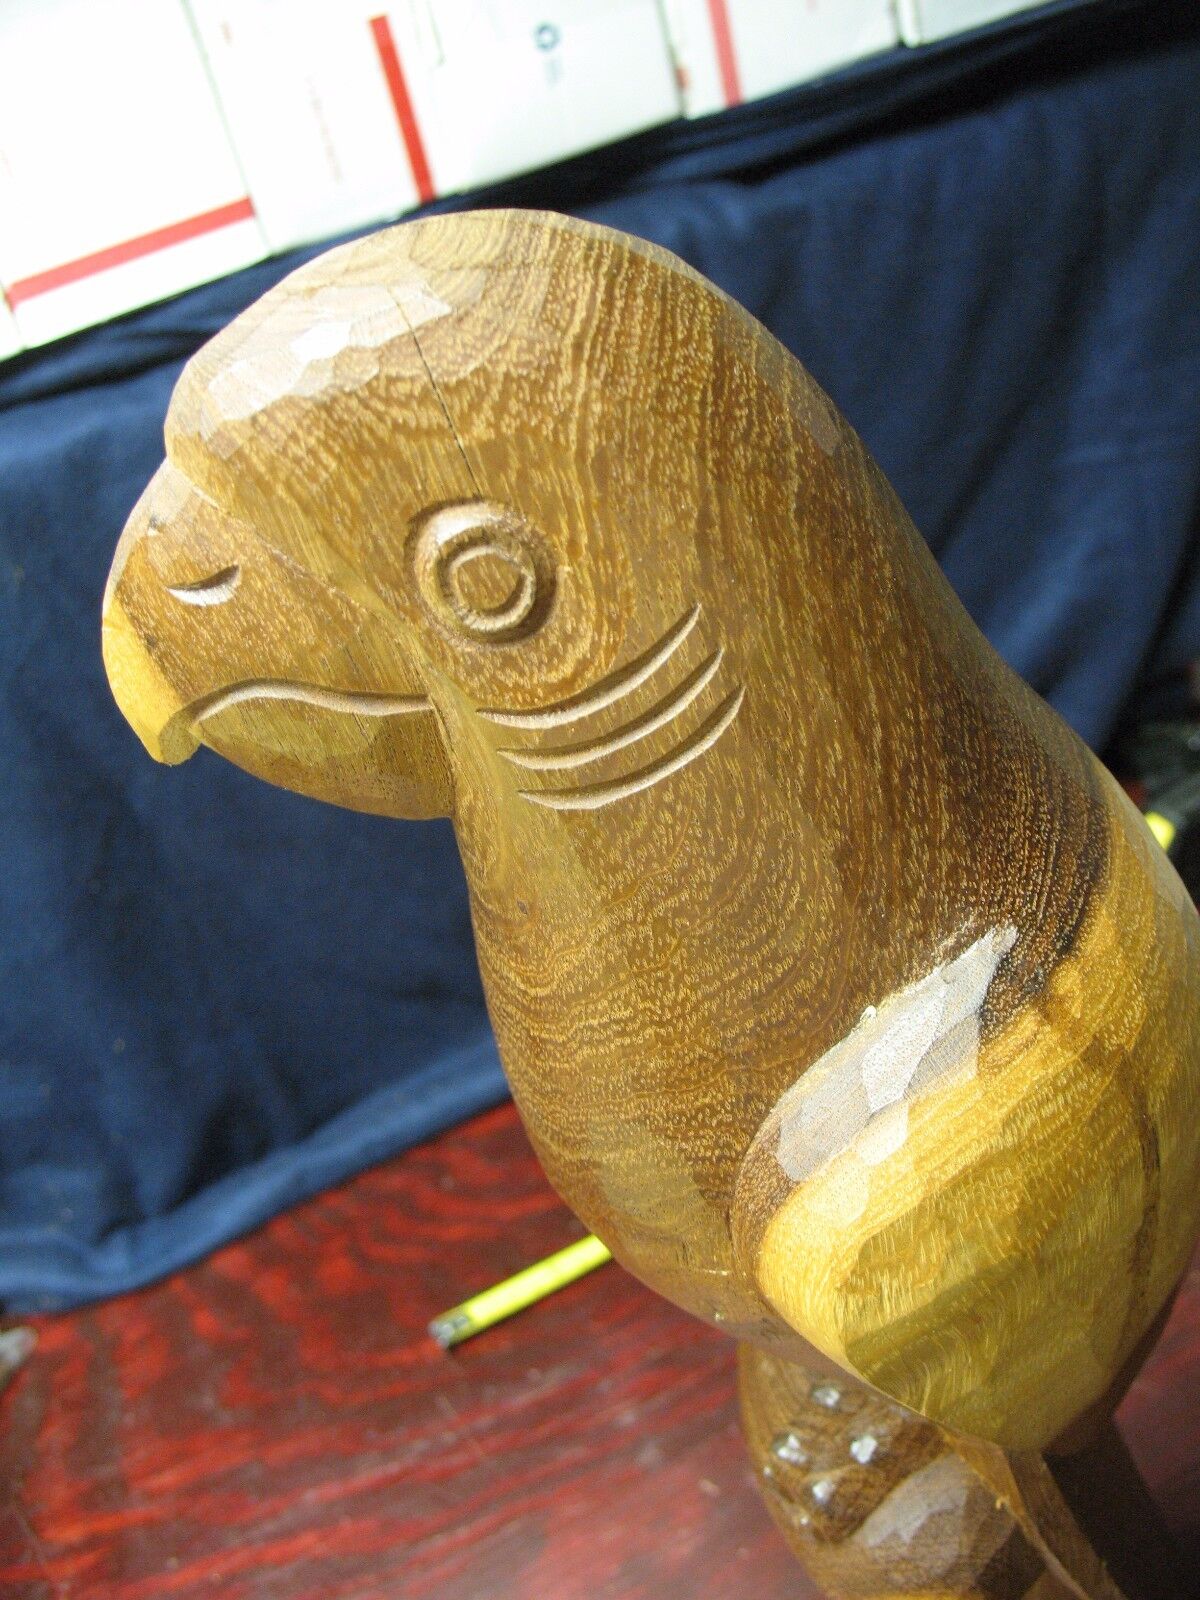  CARVED  HARDWOOD  PARROT  17\'\' TALL  VERY  NICELY  DONE  ARTIGIANO  SIGNED  